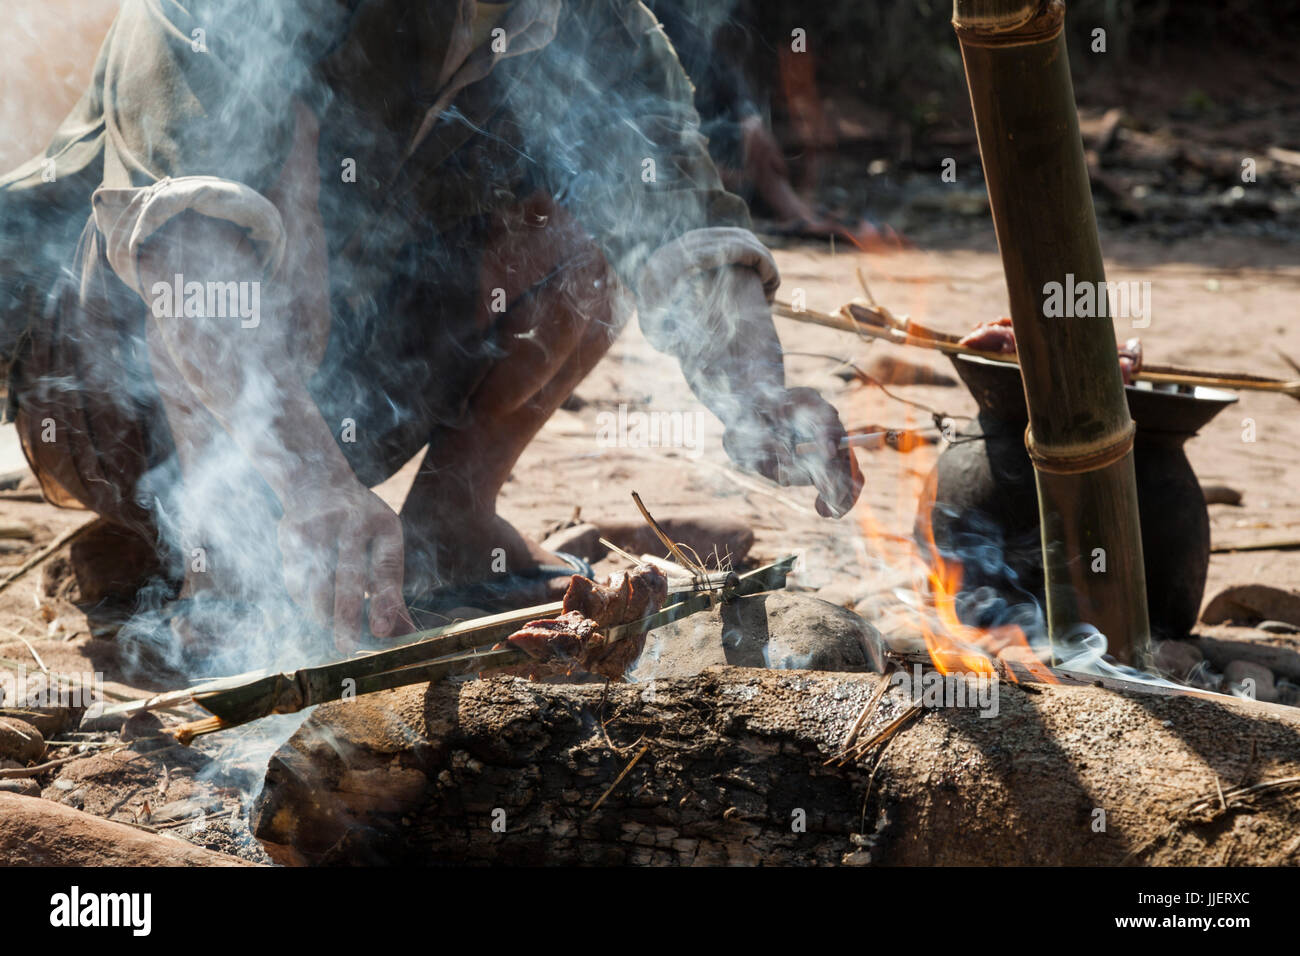 A man grills barking deer meat (Muntjacs sp.) over an open fire at his camp on the Nam Ou River in Phou Den Din National Protected Area, Laos. The area is frequented by hunters and fishermen who camp and poach wild game within park boundaries despite (or perhaps without knowledge) that this is technically illegal. Stock Photo